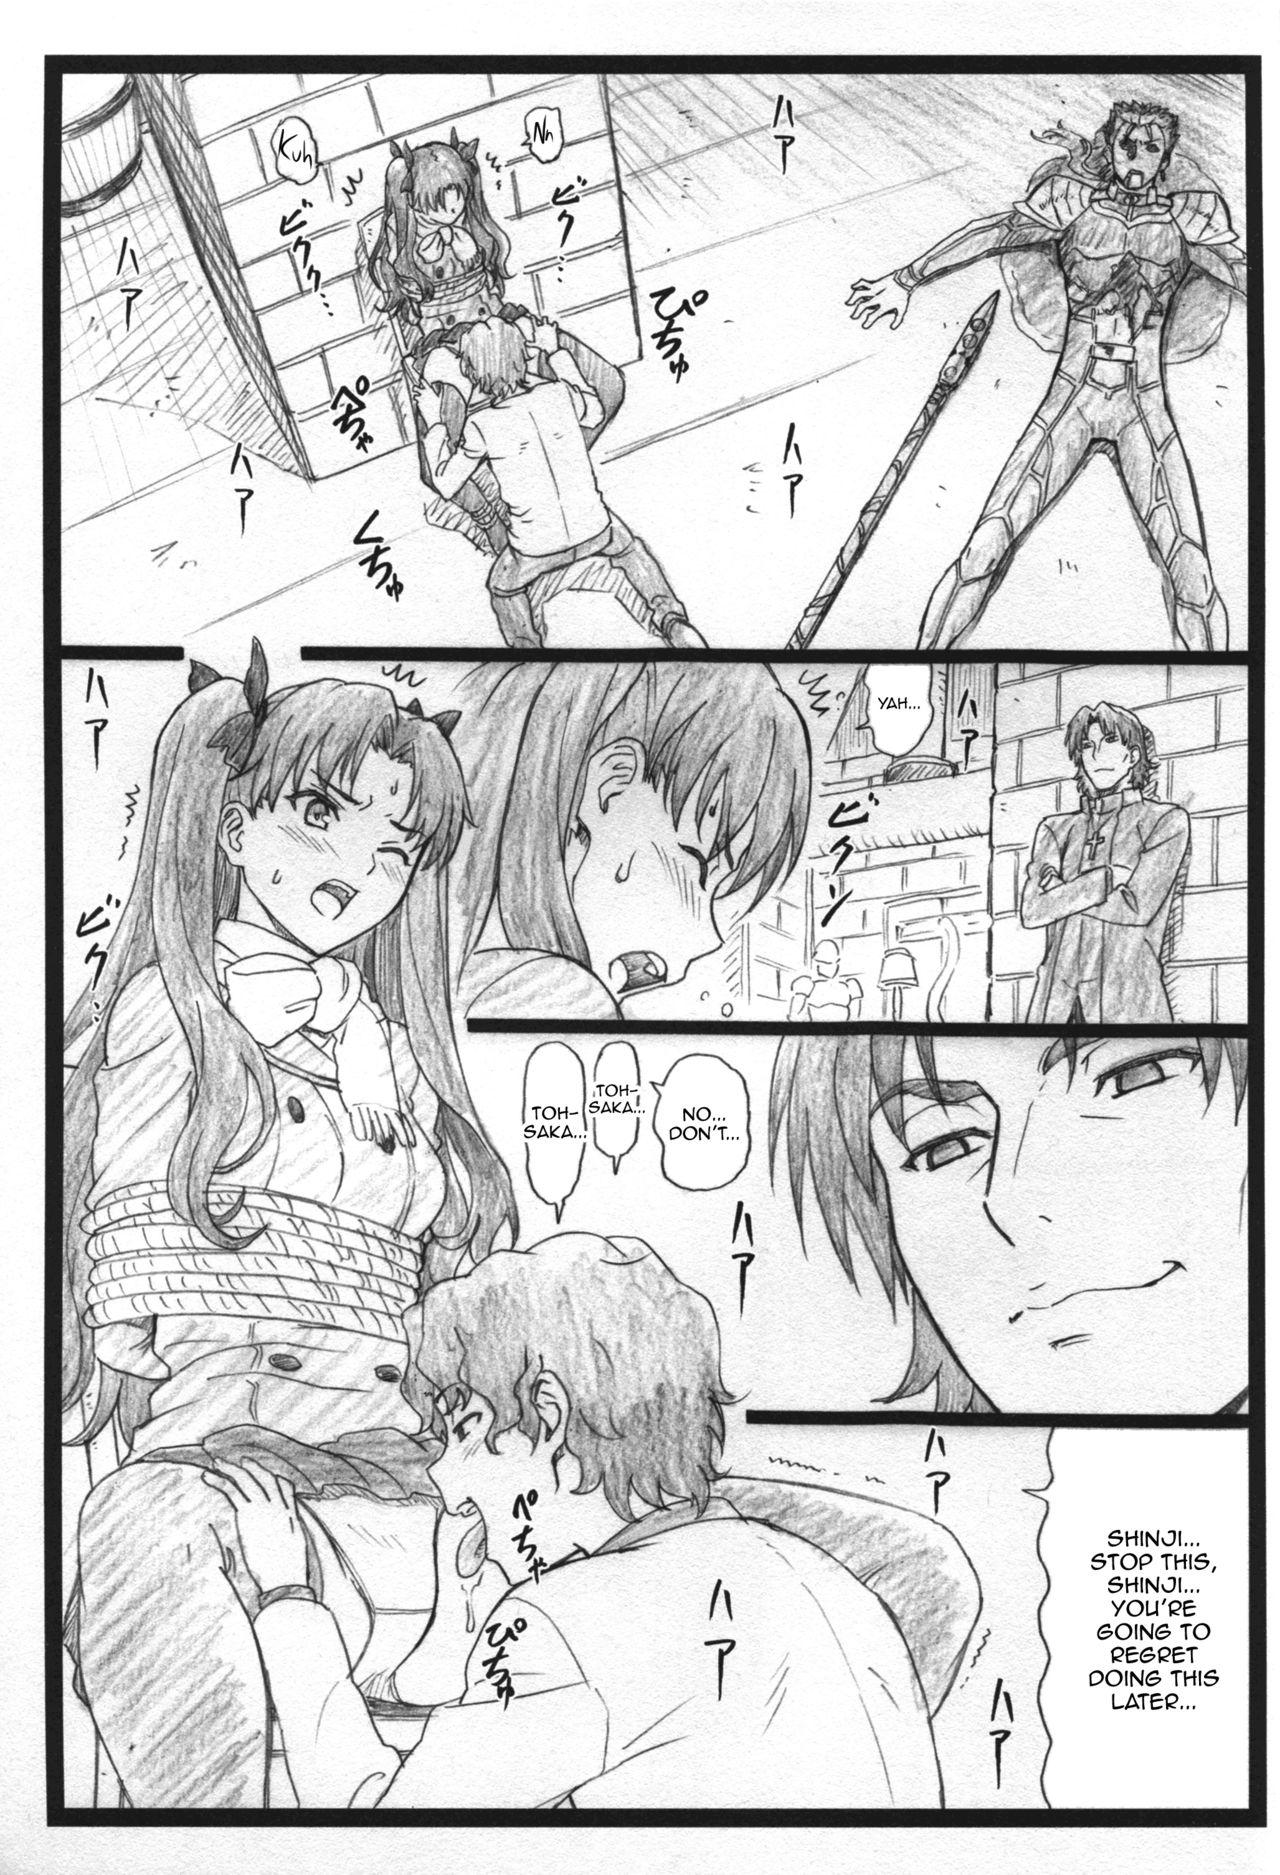 Transsexual Rin to Shite... | With Rin... - Fate stay night Dad - Page 3